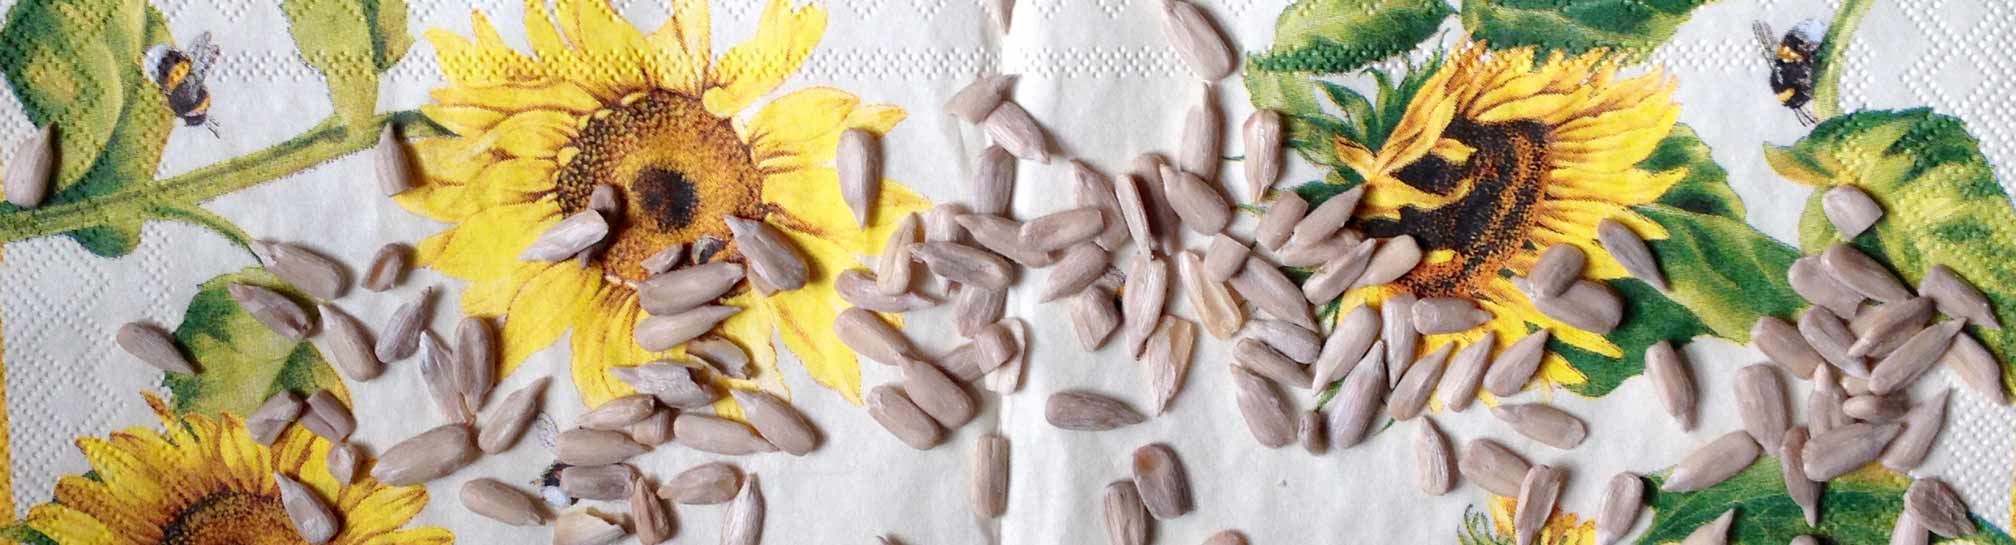 sunflower seeds on napkin decorated with sunflowers and bees